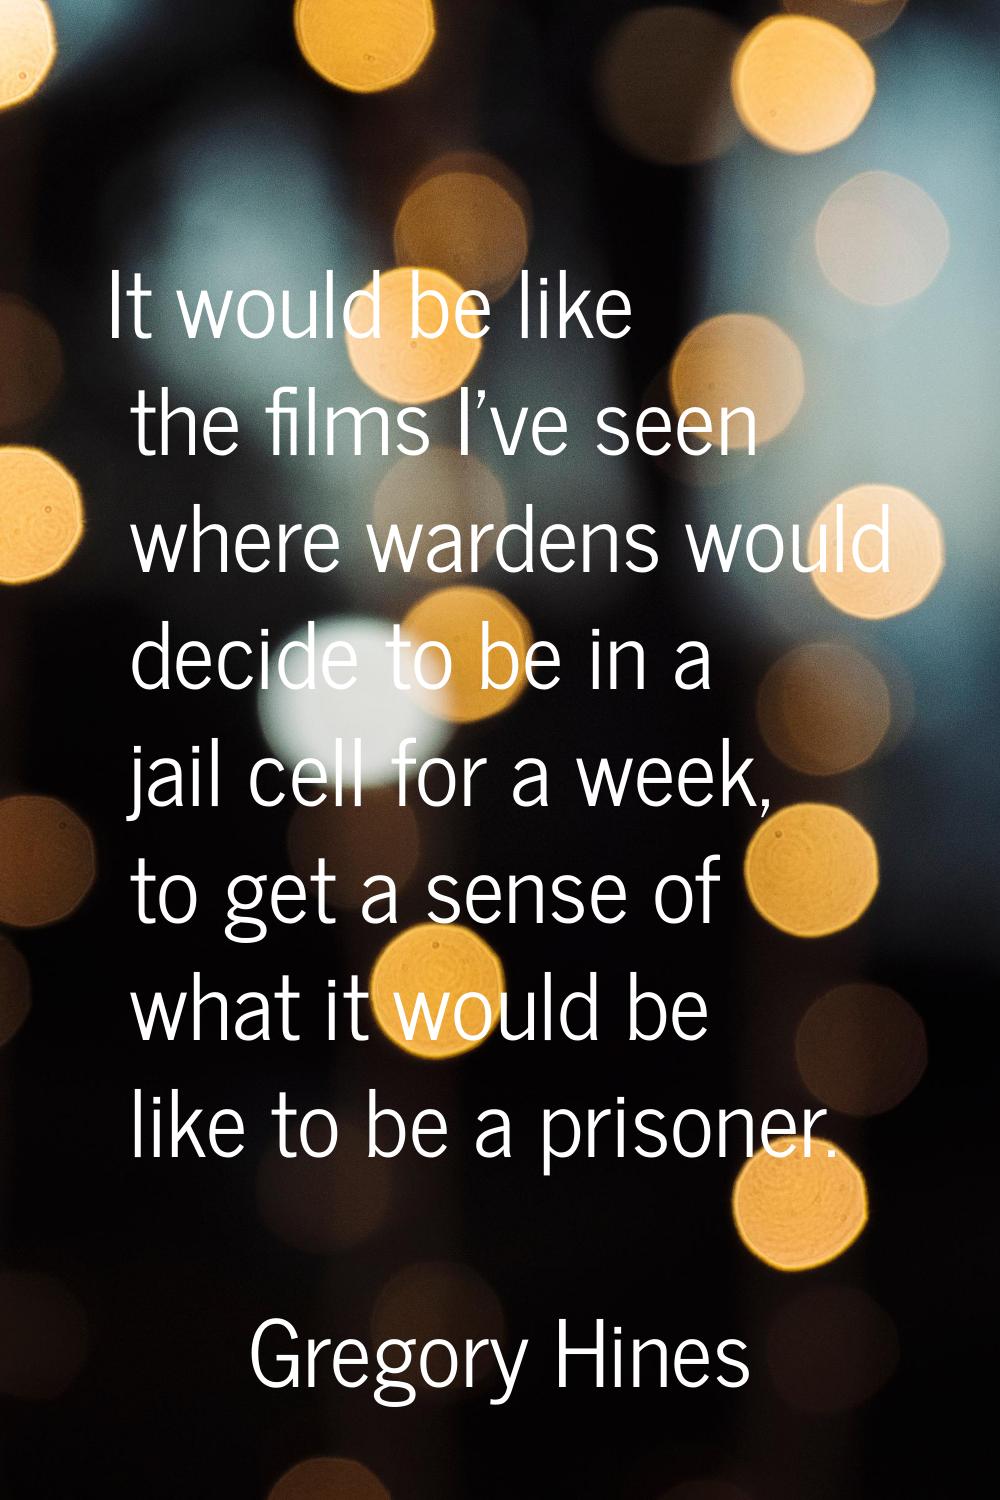 It would be like the films I've seen where wardens would decide to be in a jail cell for a week, to